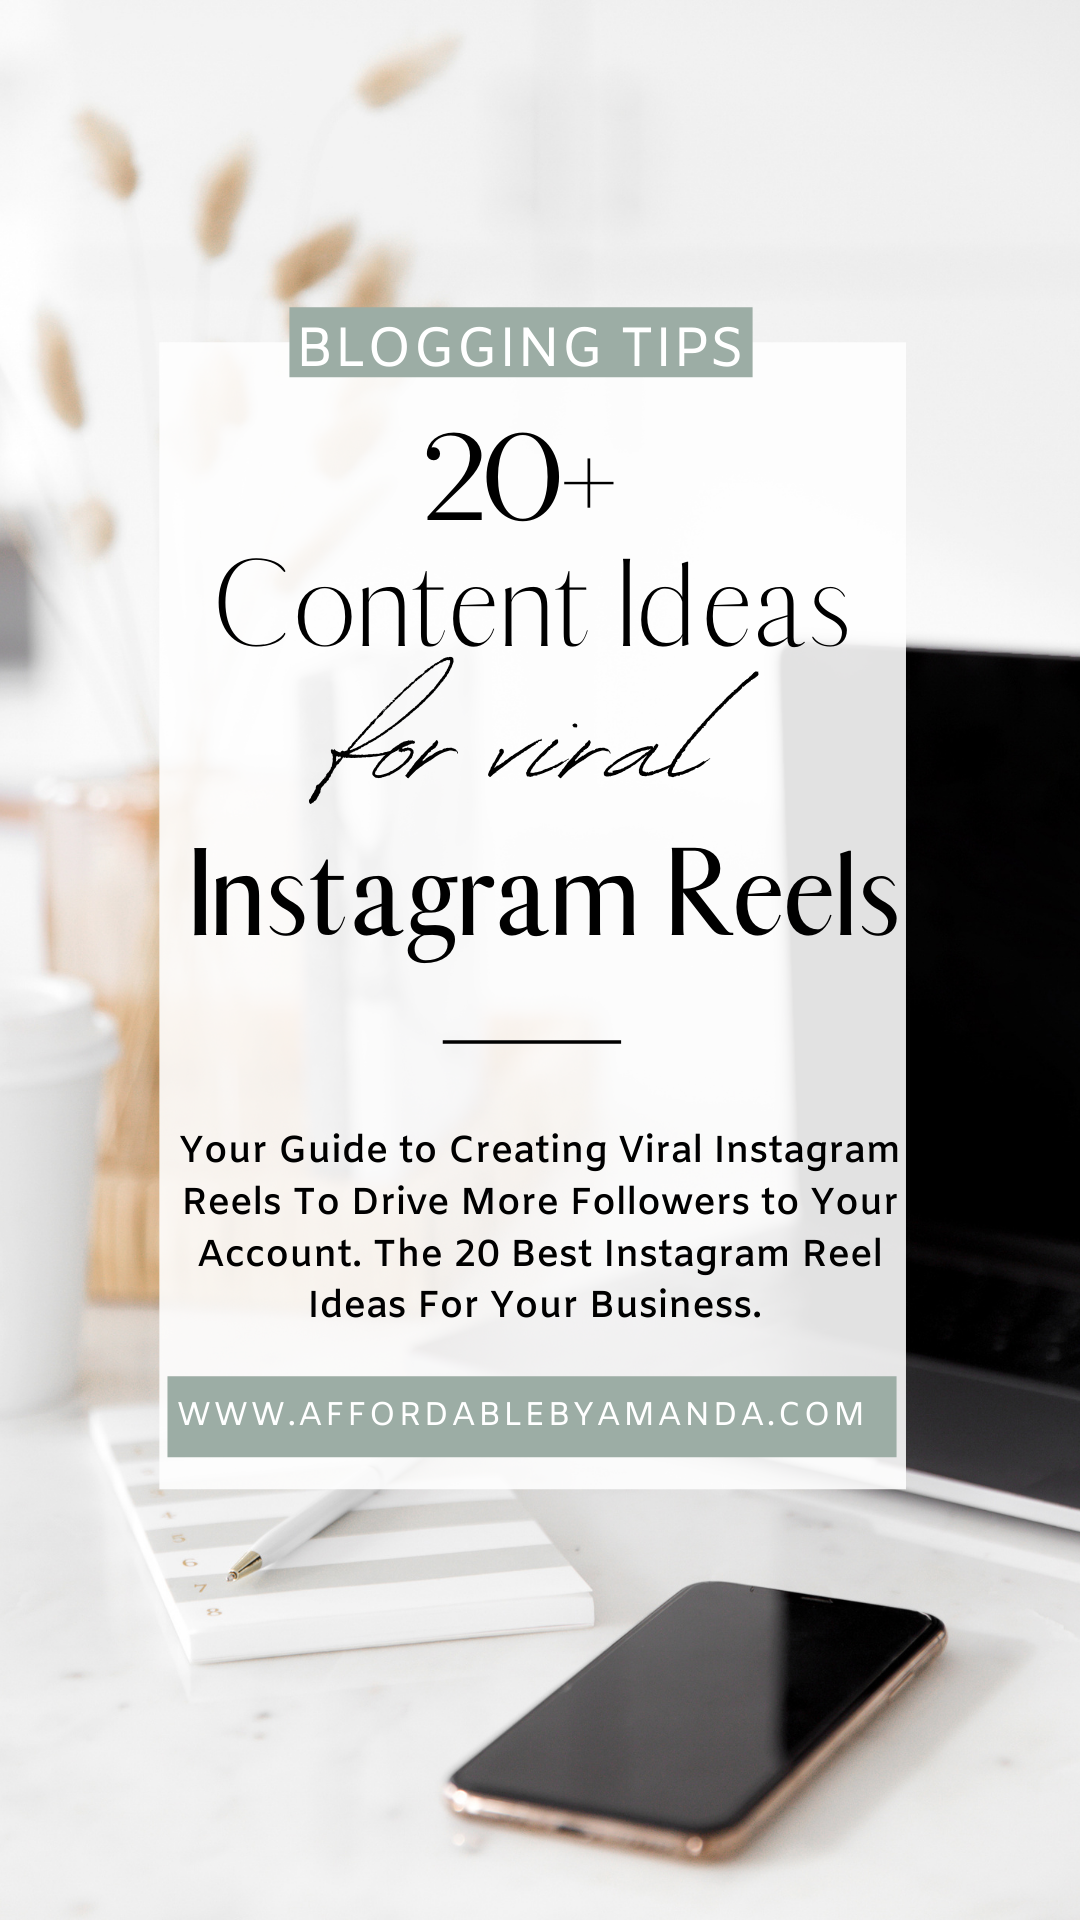 20 Content Ideas for Instagram Reels in 2021 - Blogging Tips - Affordable by Amanda